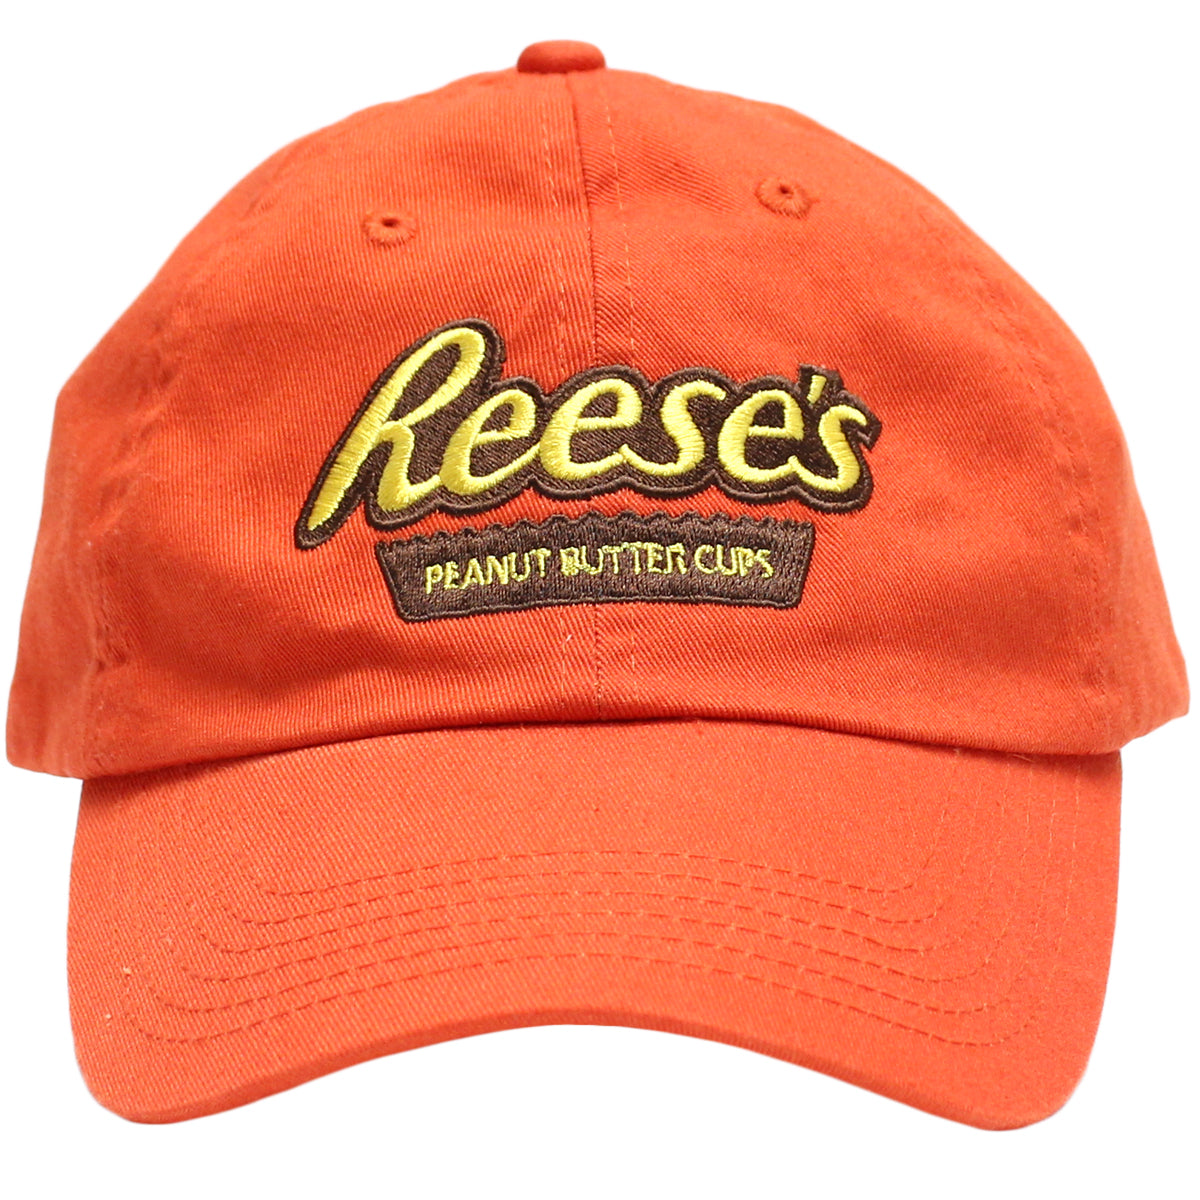 REESE'S PEANUT BUTTER CUP (Orange) / Baseball Hat - Route One Apparel